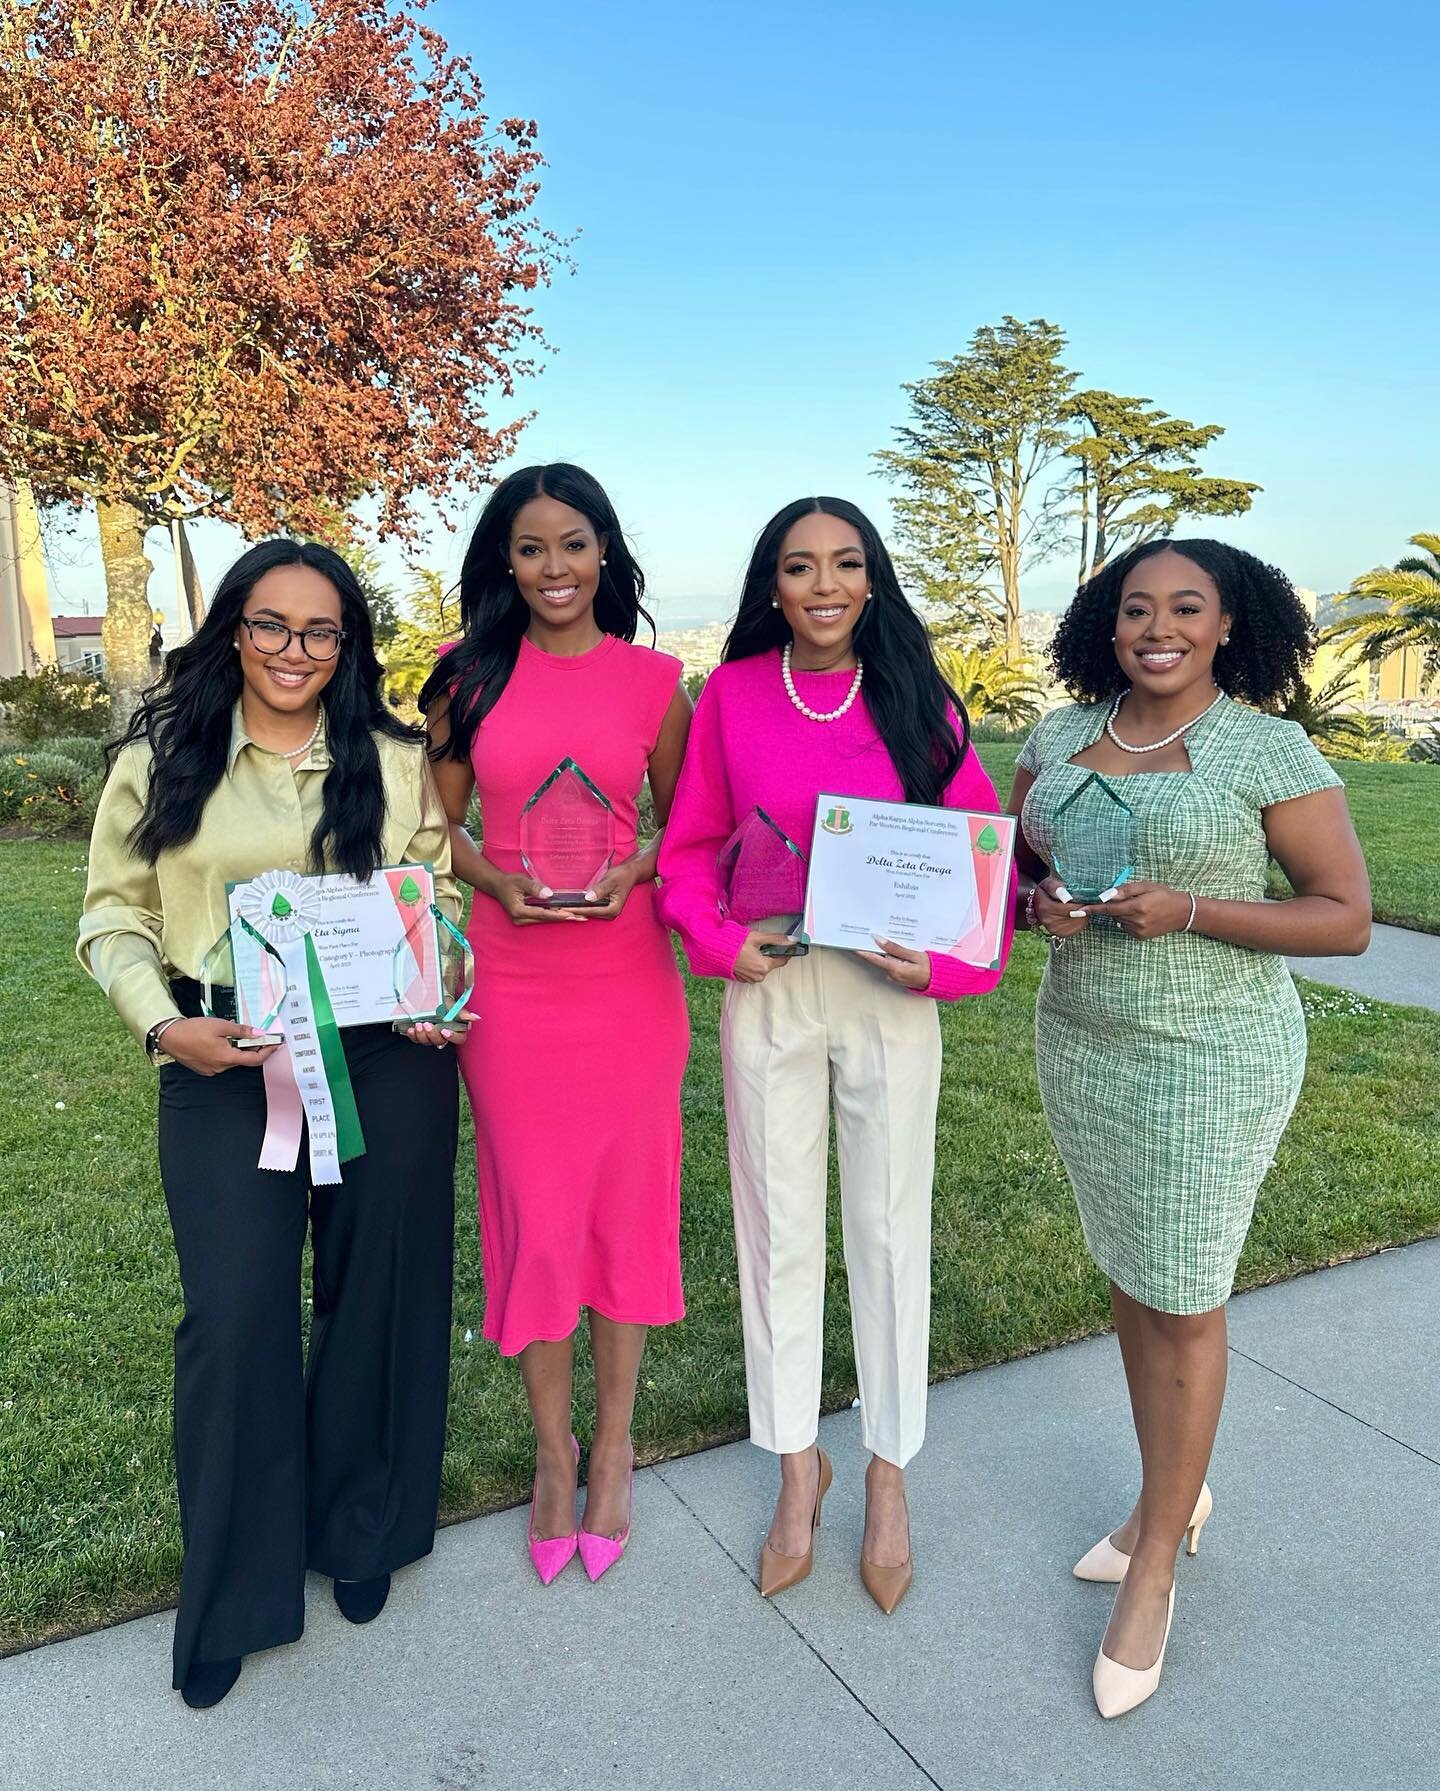 During our 94th FWRC, Alpha Kappa Alpha Sorority, Inc. Delta Zeta Omega &amp; Eta Sigma chapter reigned supreme in service to all mankind and took home several awards. 

Here are a few awards that we had the honor of receiving: 

Delta Zeta Omega (Gr